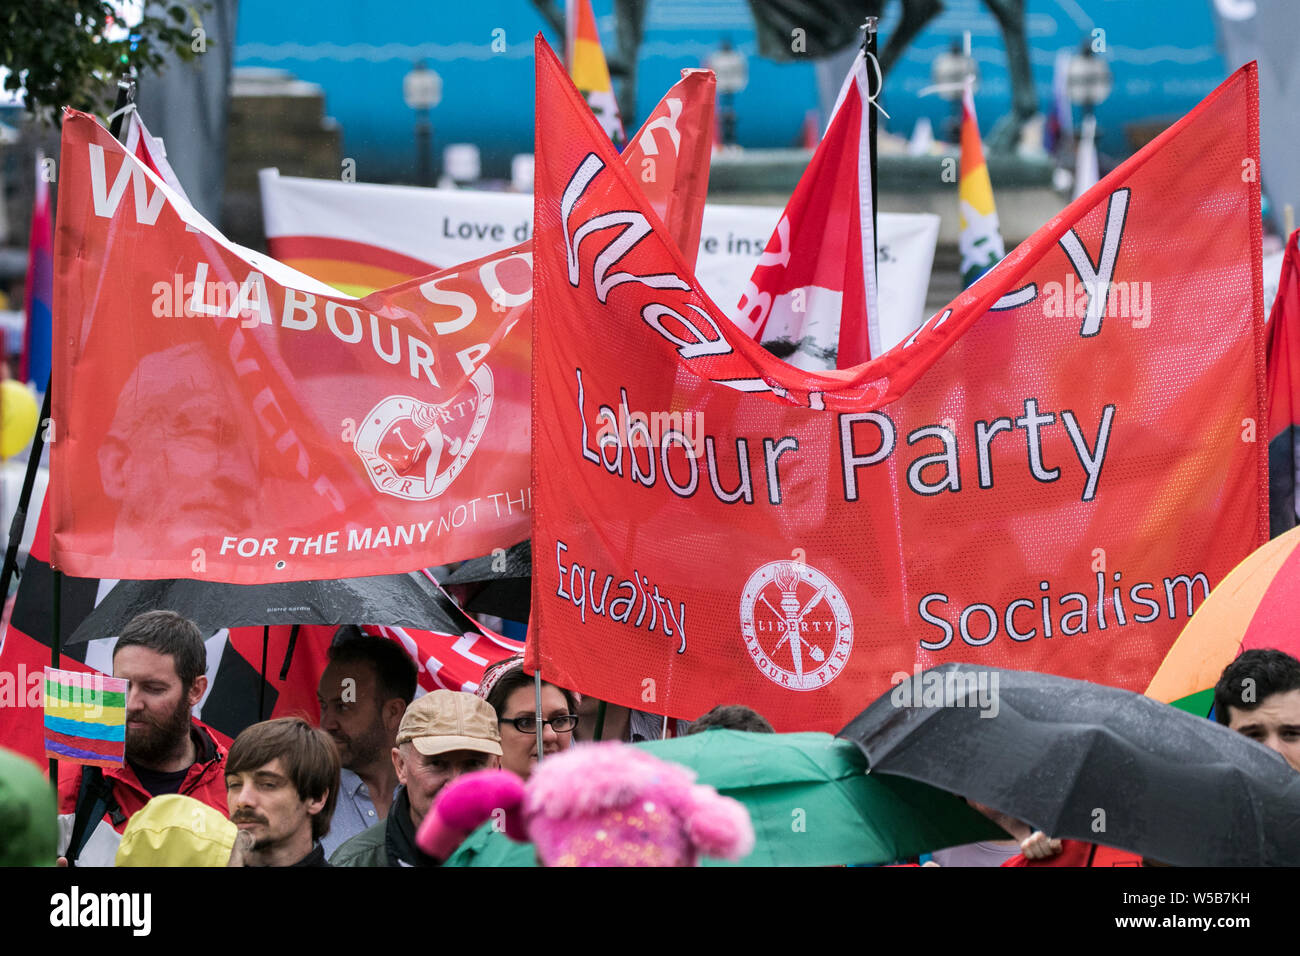 The Labour Party UK, crowds, socialist banners and flags, political placard demonstration waving red banner sign Liverpool Merseyside. Stock Photo